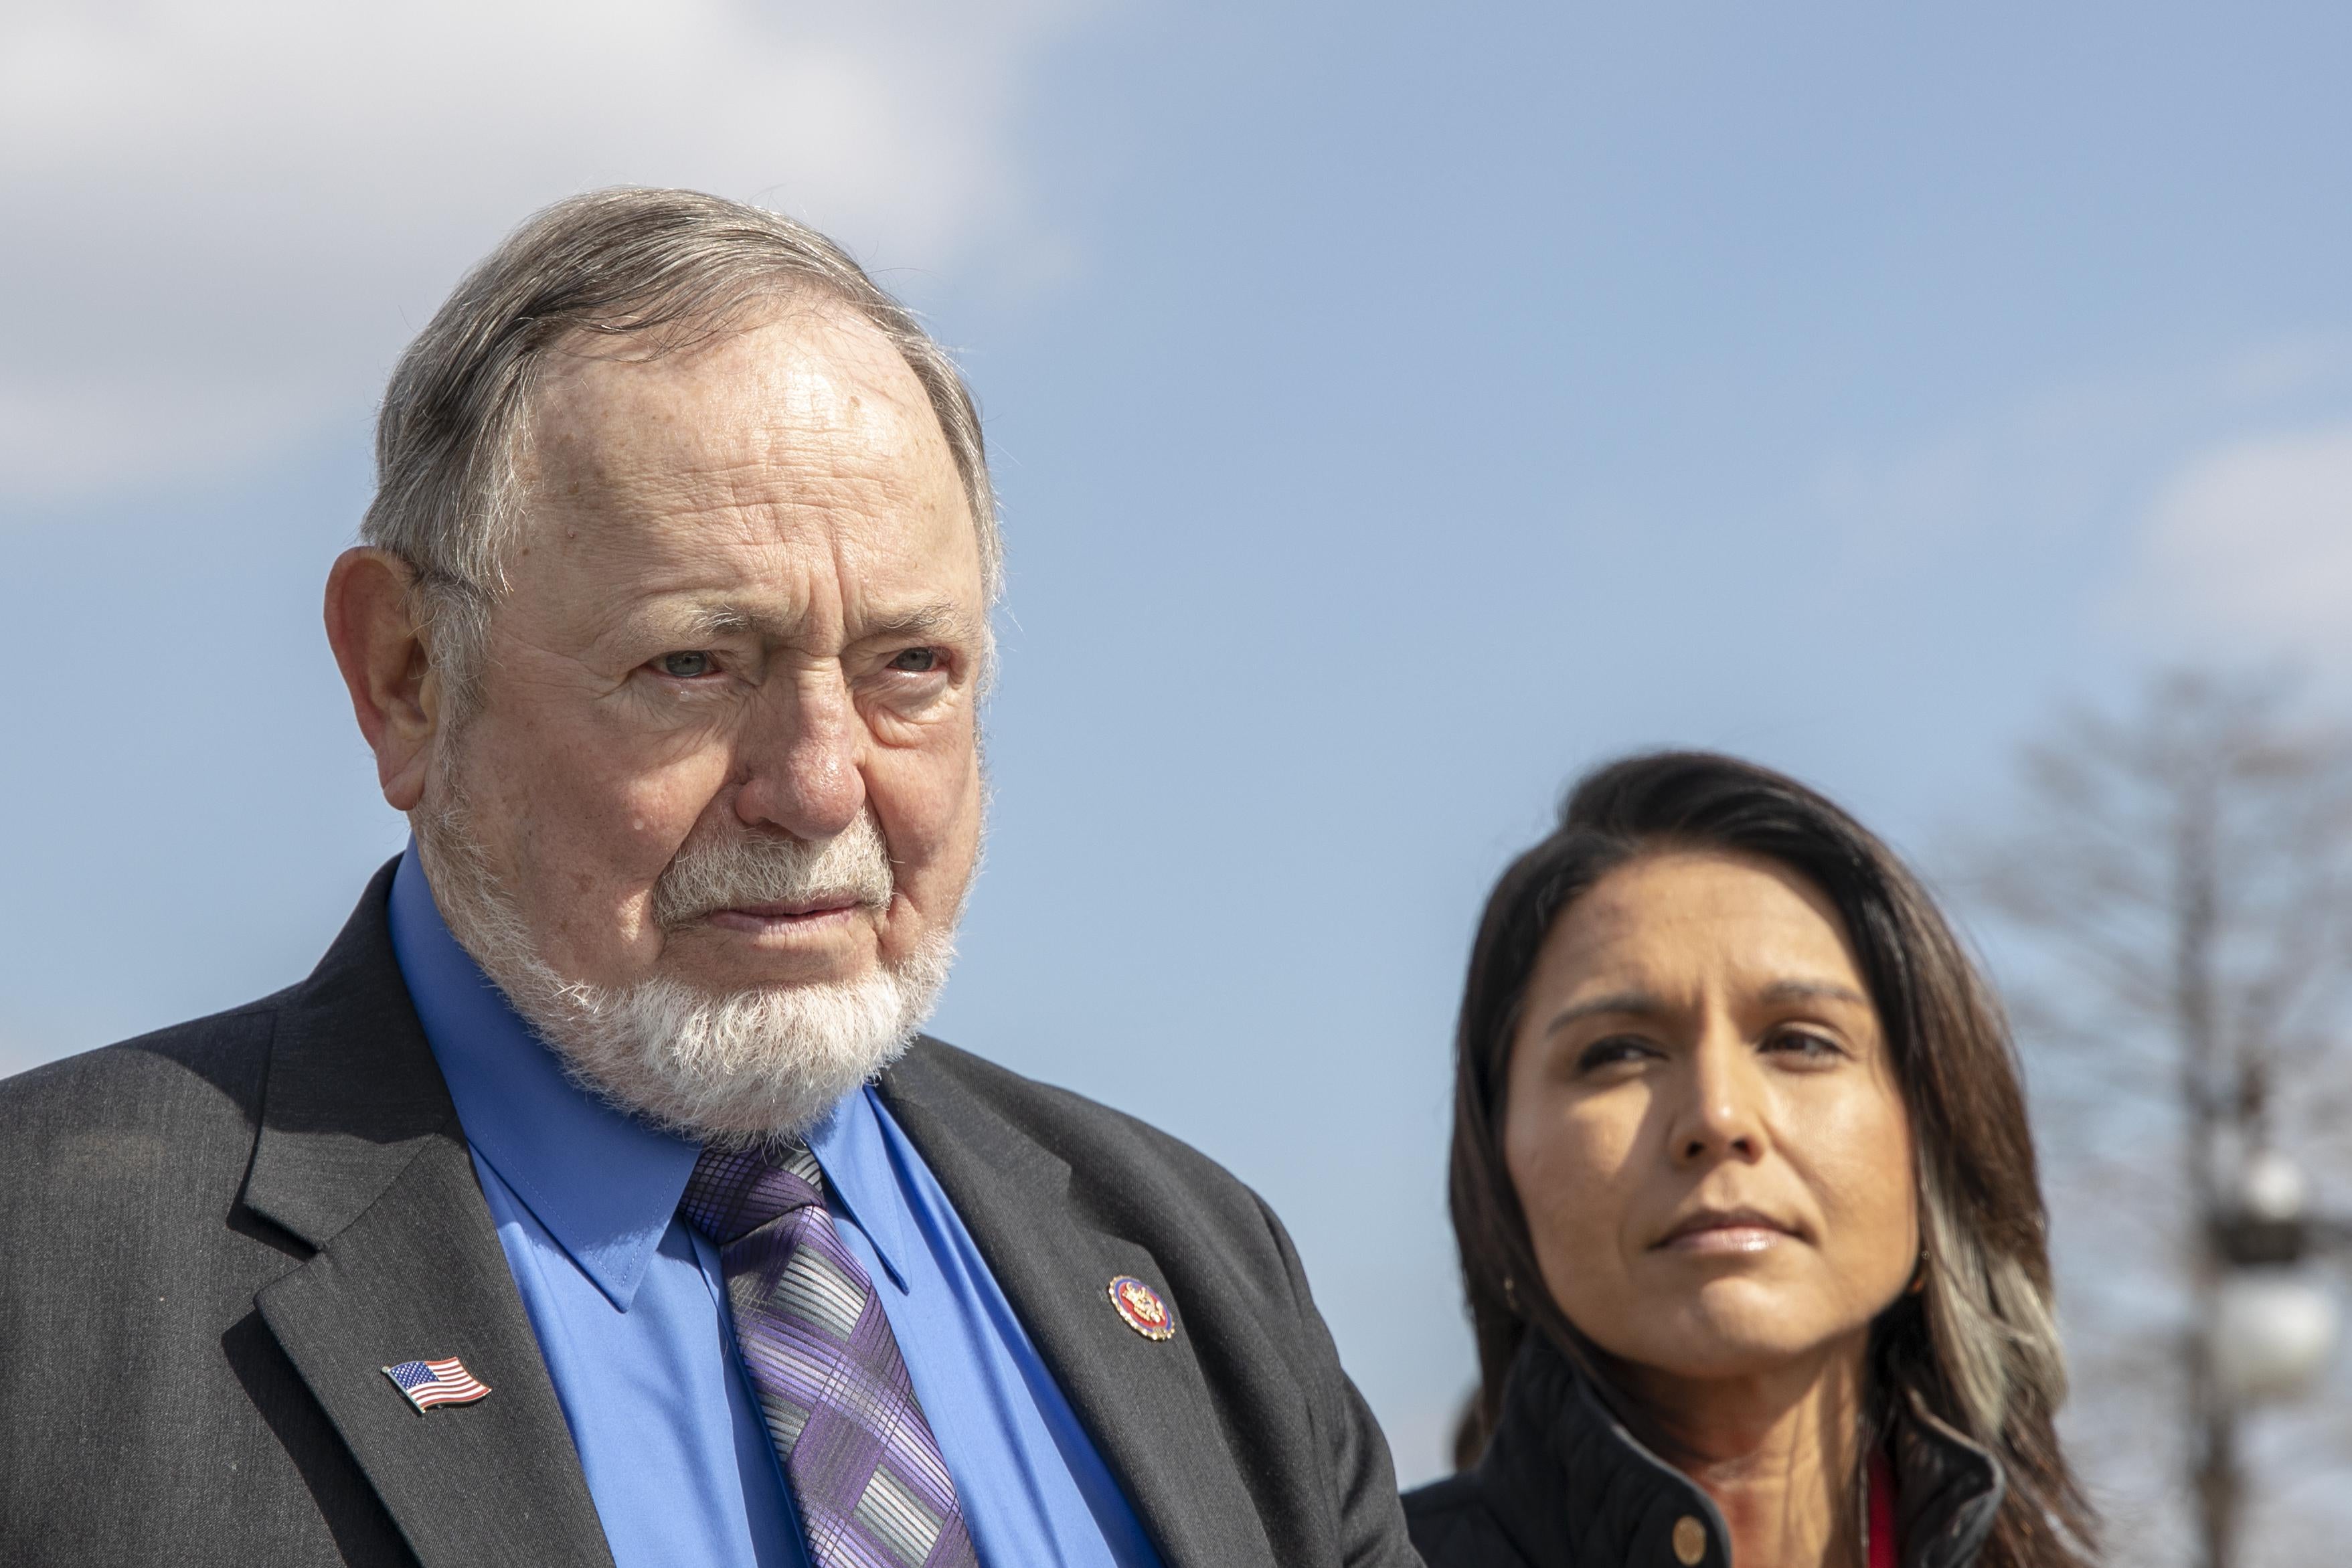 Rep. Don Young, R-Alaska and Rep. Tulsi Gabbard, D-Hawaii hold a news conference on March 7, 2019 in Washington, D.C. 